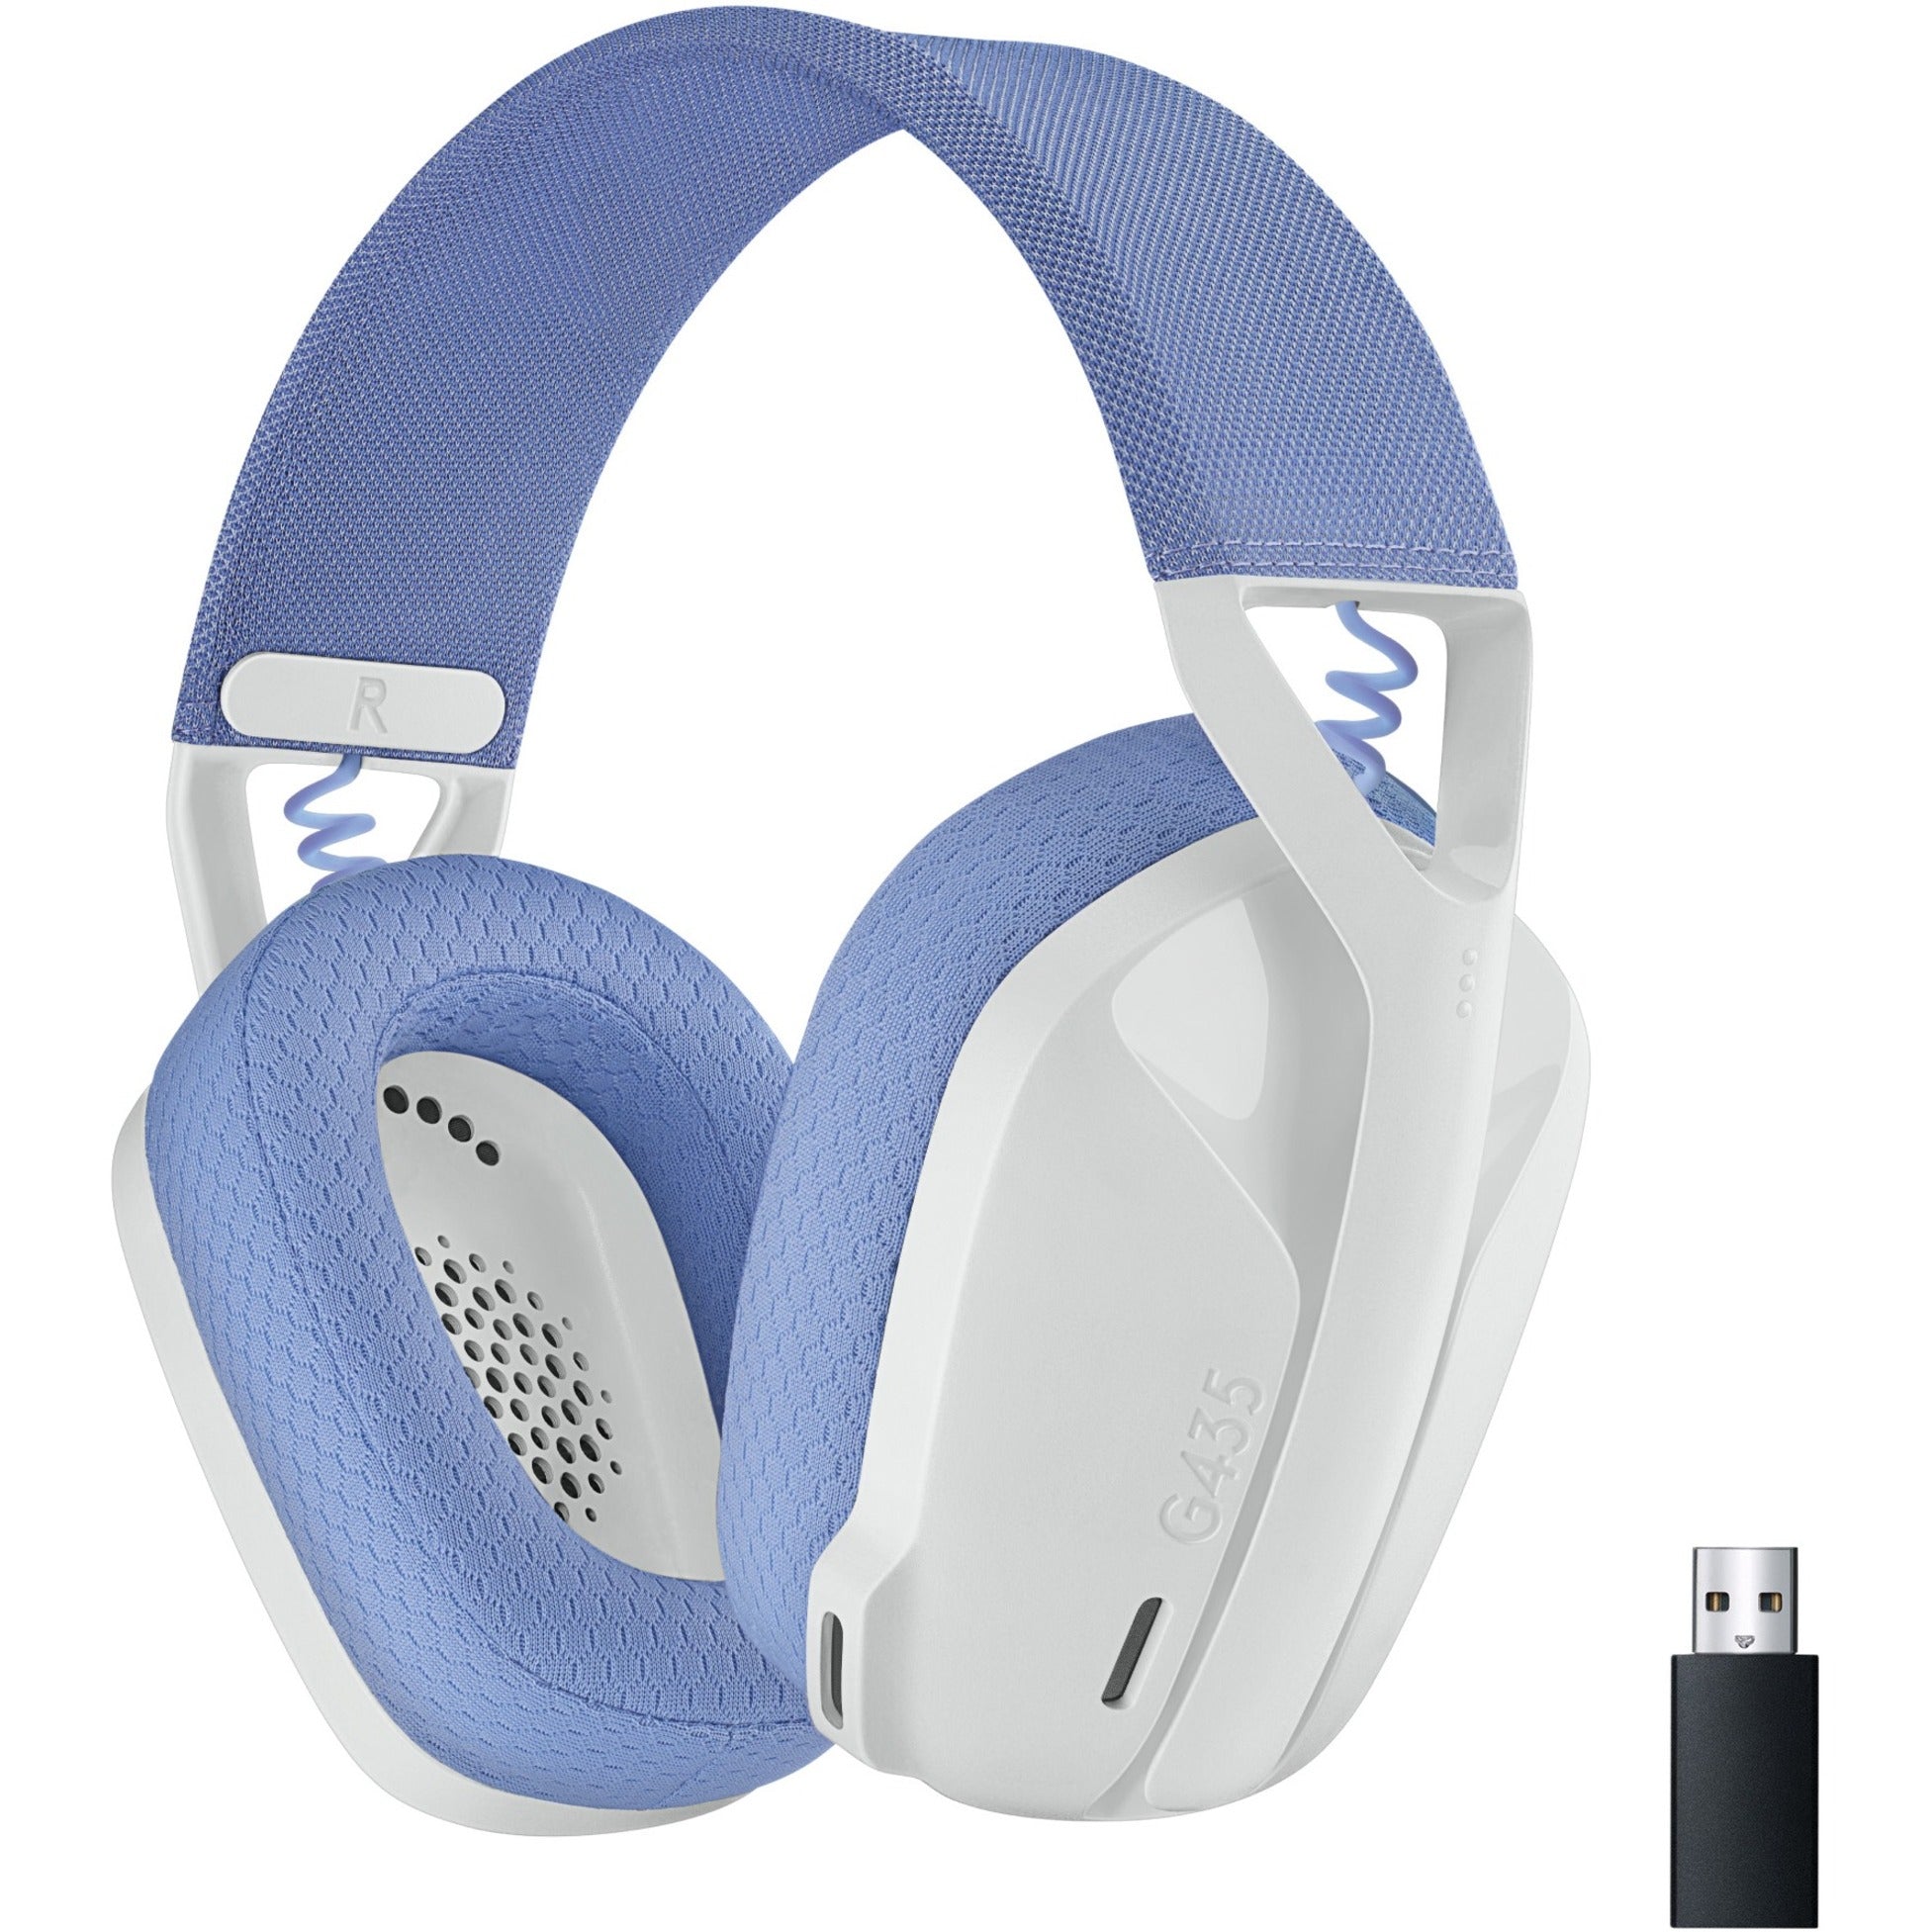 Logitech 981-001073 G435 Lightspeed Wireless Gaming Headset, Lightweight and Comfortable, Lilac and Off White